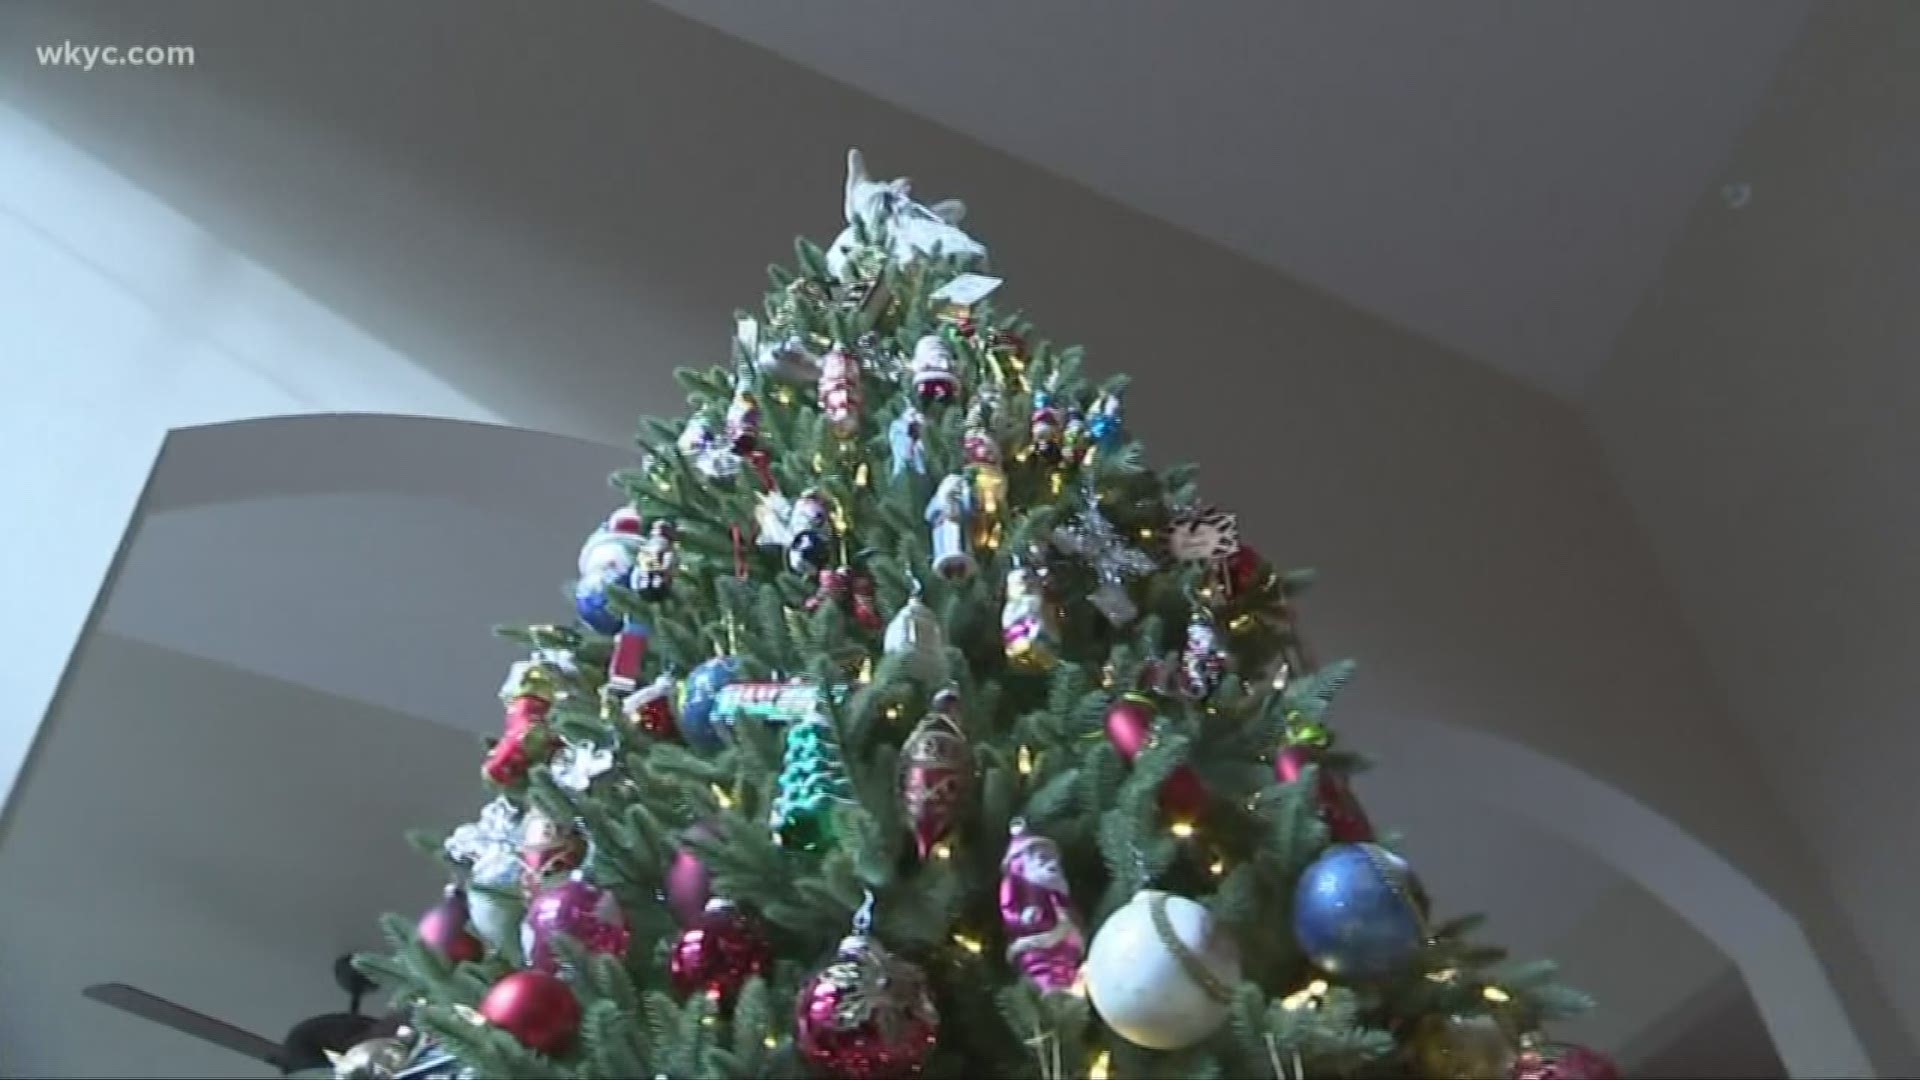 Beware: Holiday decorations may contain hidden allergens